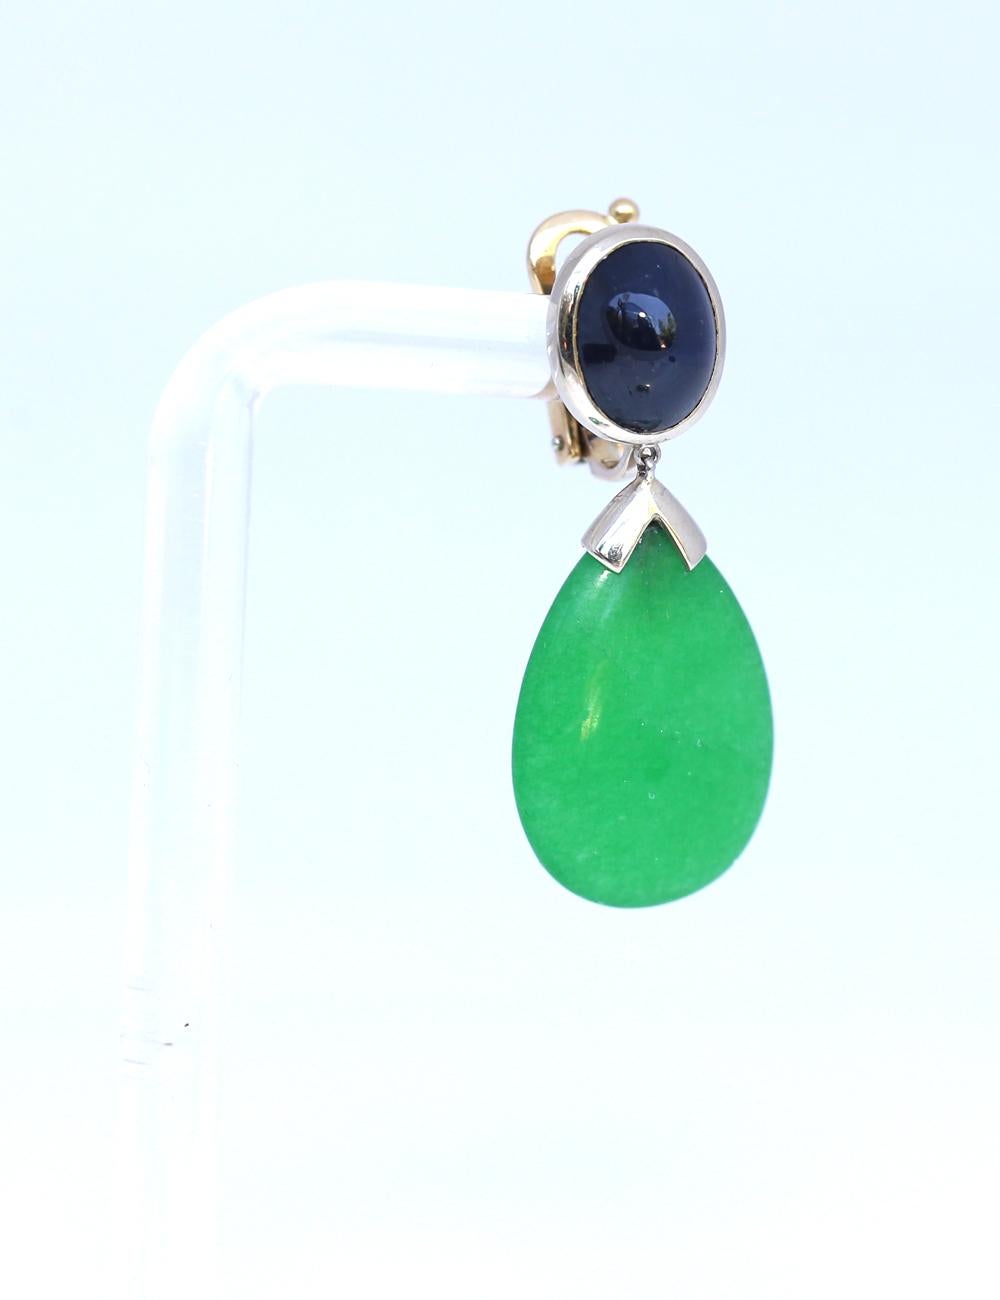 Fine Jade and Star Sapphire cabochon earrings. Modern yet classic in style it is a comprehensive jewelry item for every day. Looks wonderful on the ear and moves freely with the head. There is a black spot on the bottom of one Jade, it is